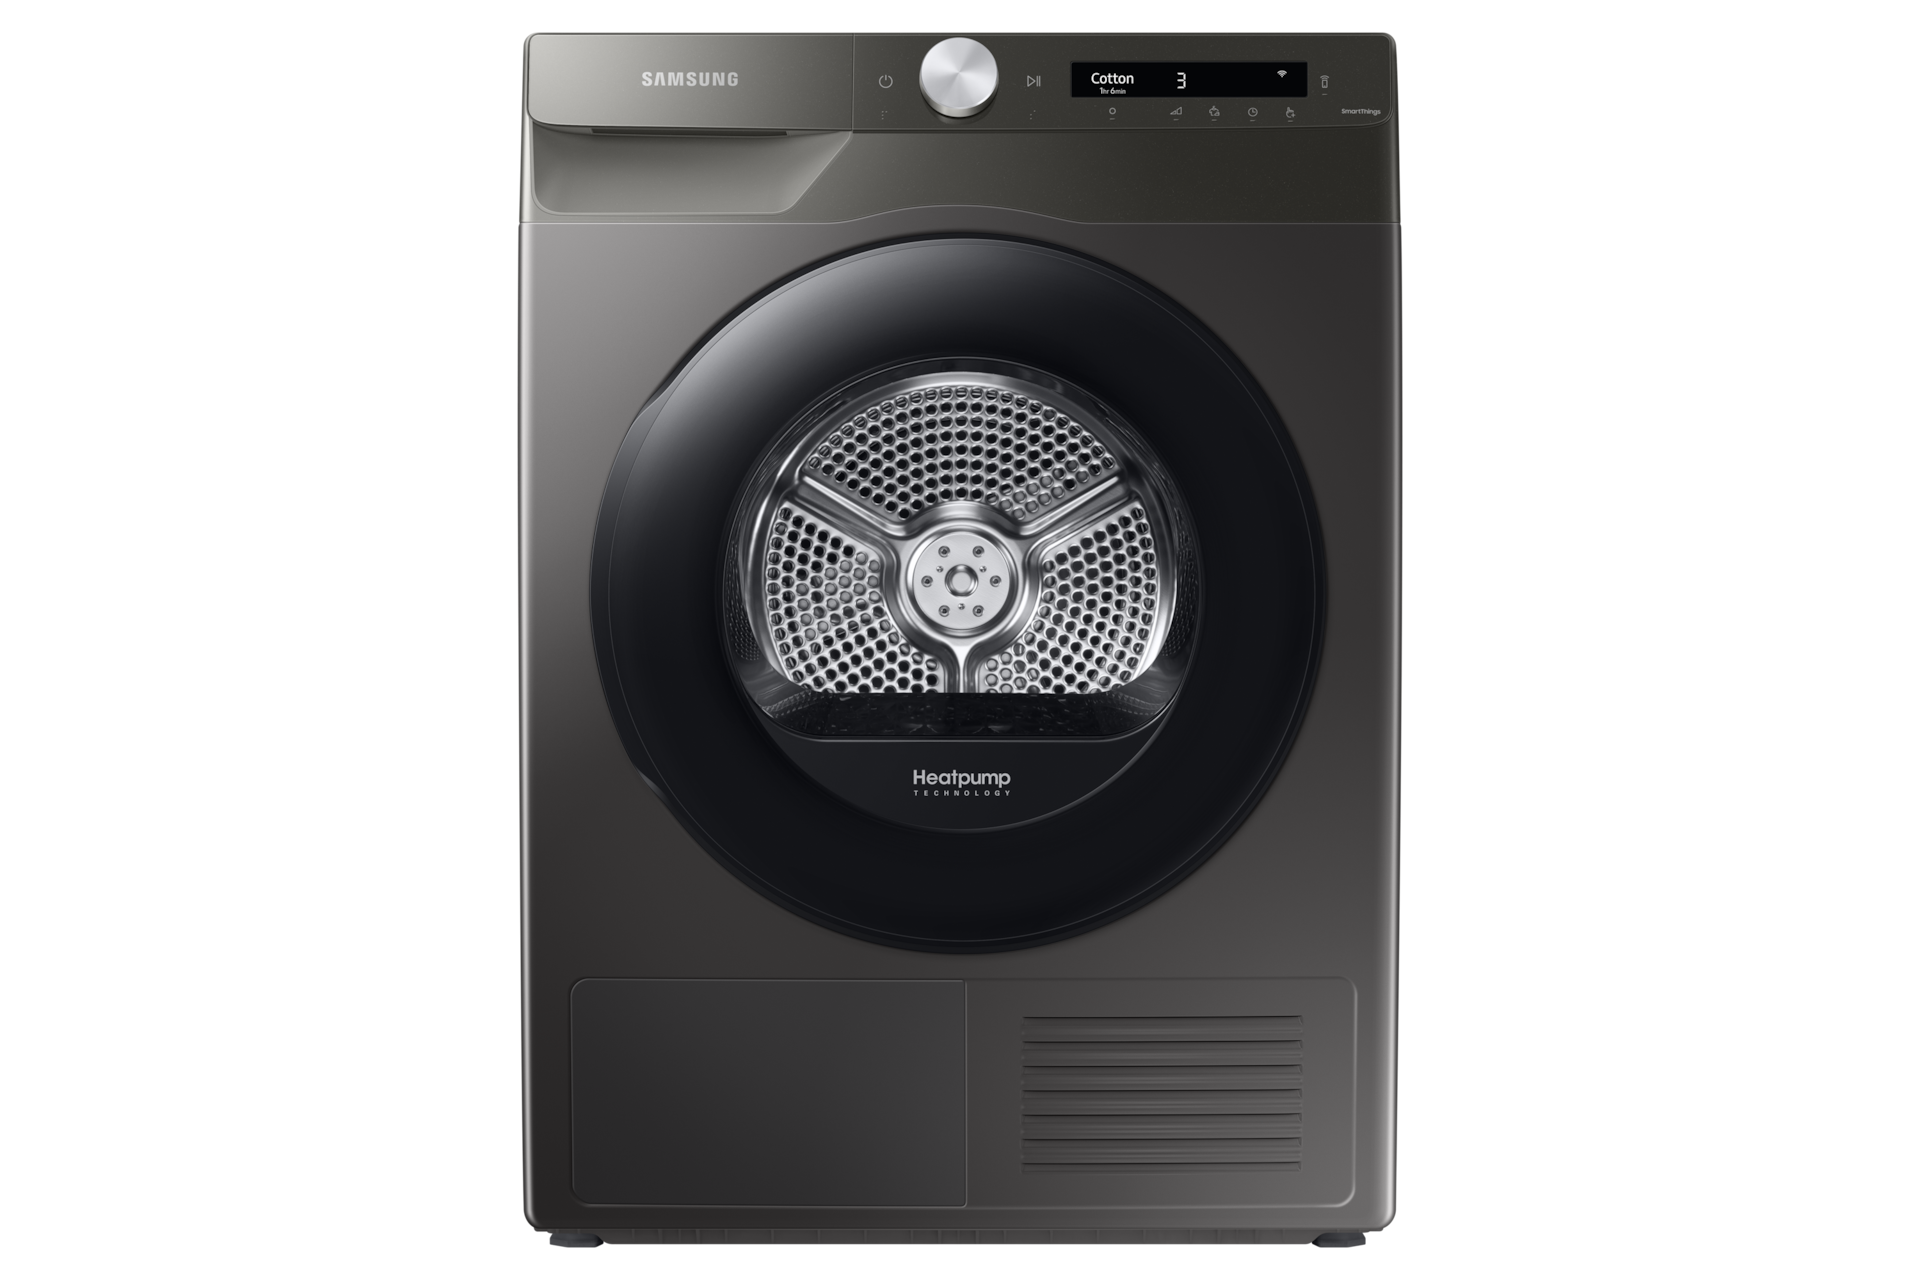 Samsung 9kg Tumble Dryer with Heat Pump Technology and Sensor Drying, DV90T5240AN in Inox